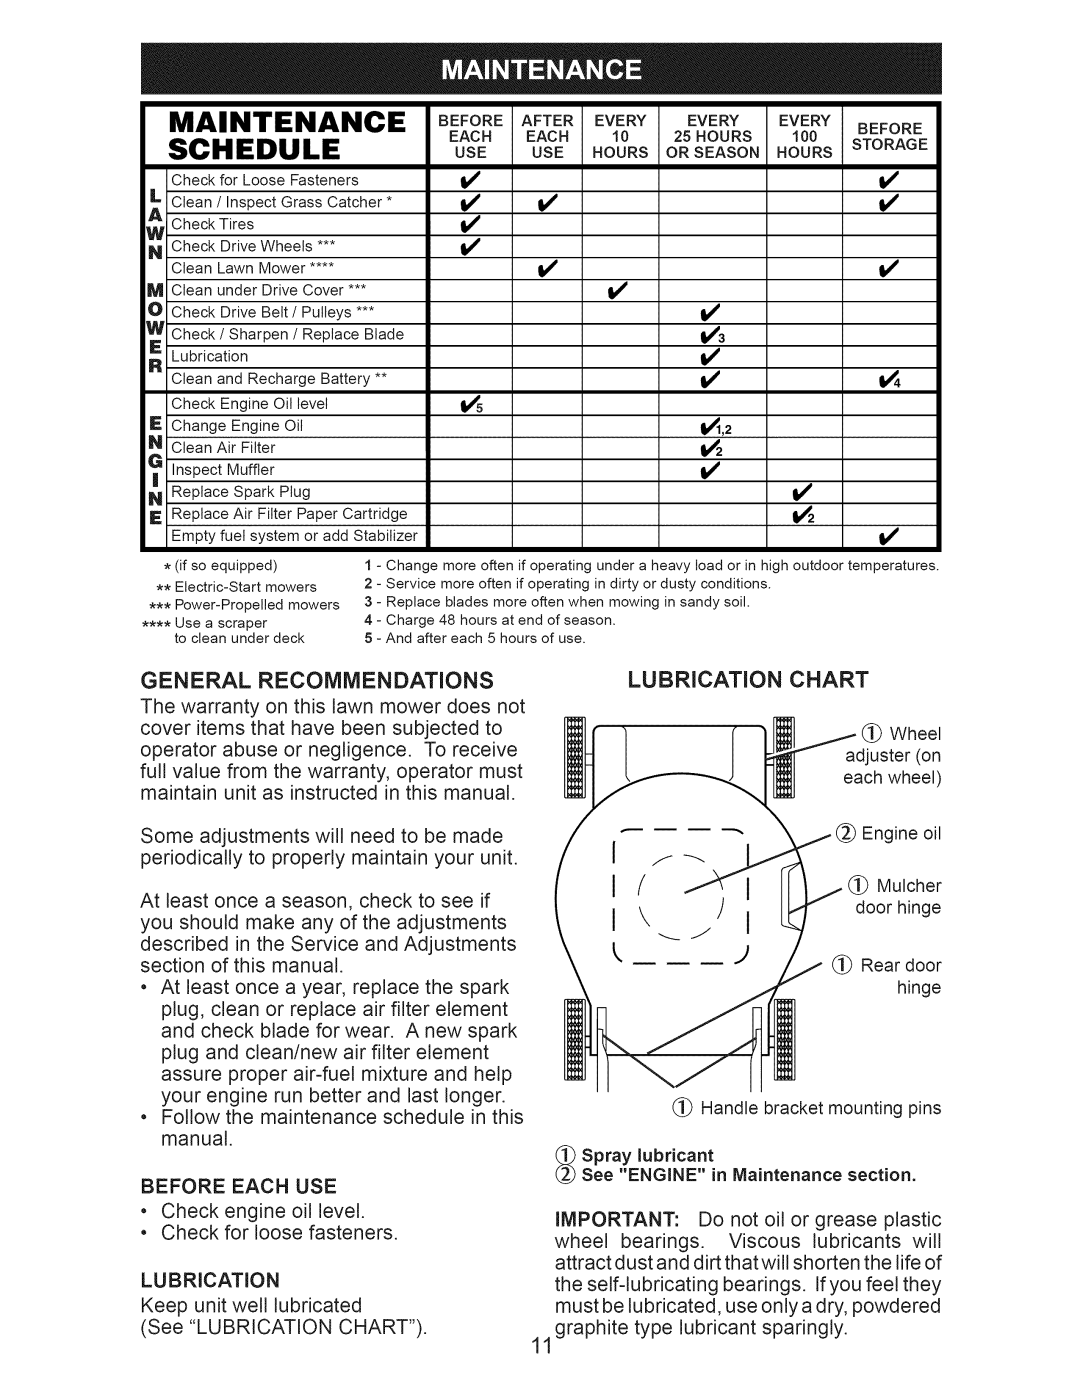 Craftsman 917.389011 manual Maintenance, Schedule, Use Hours 